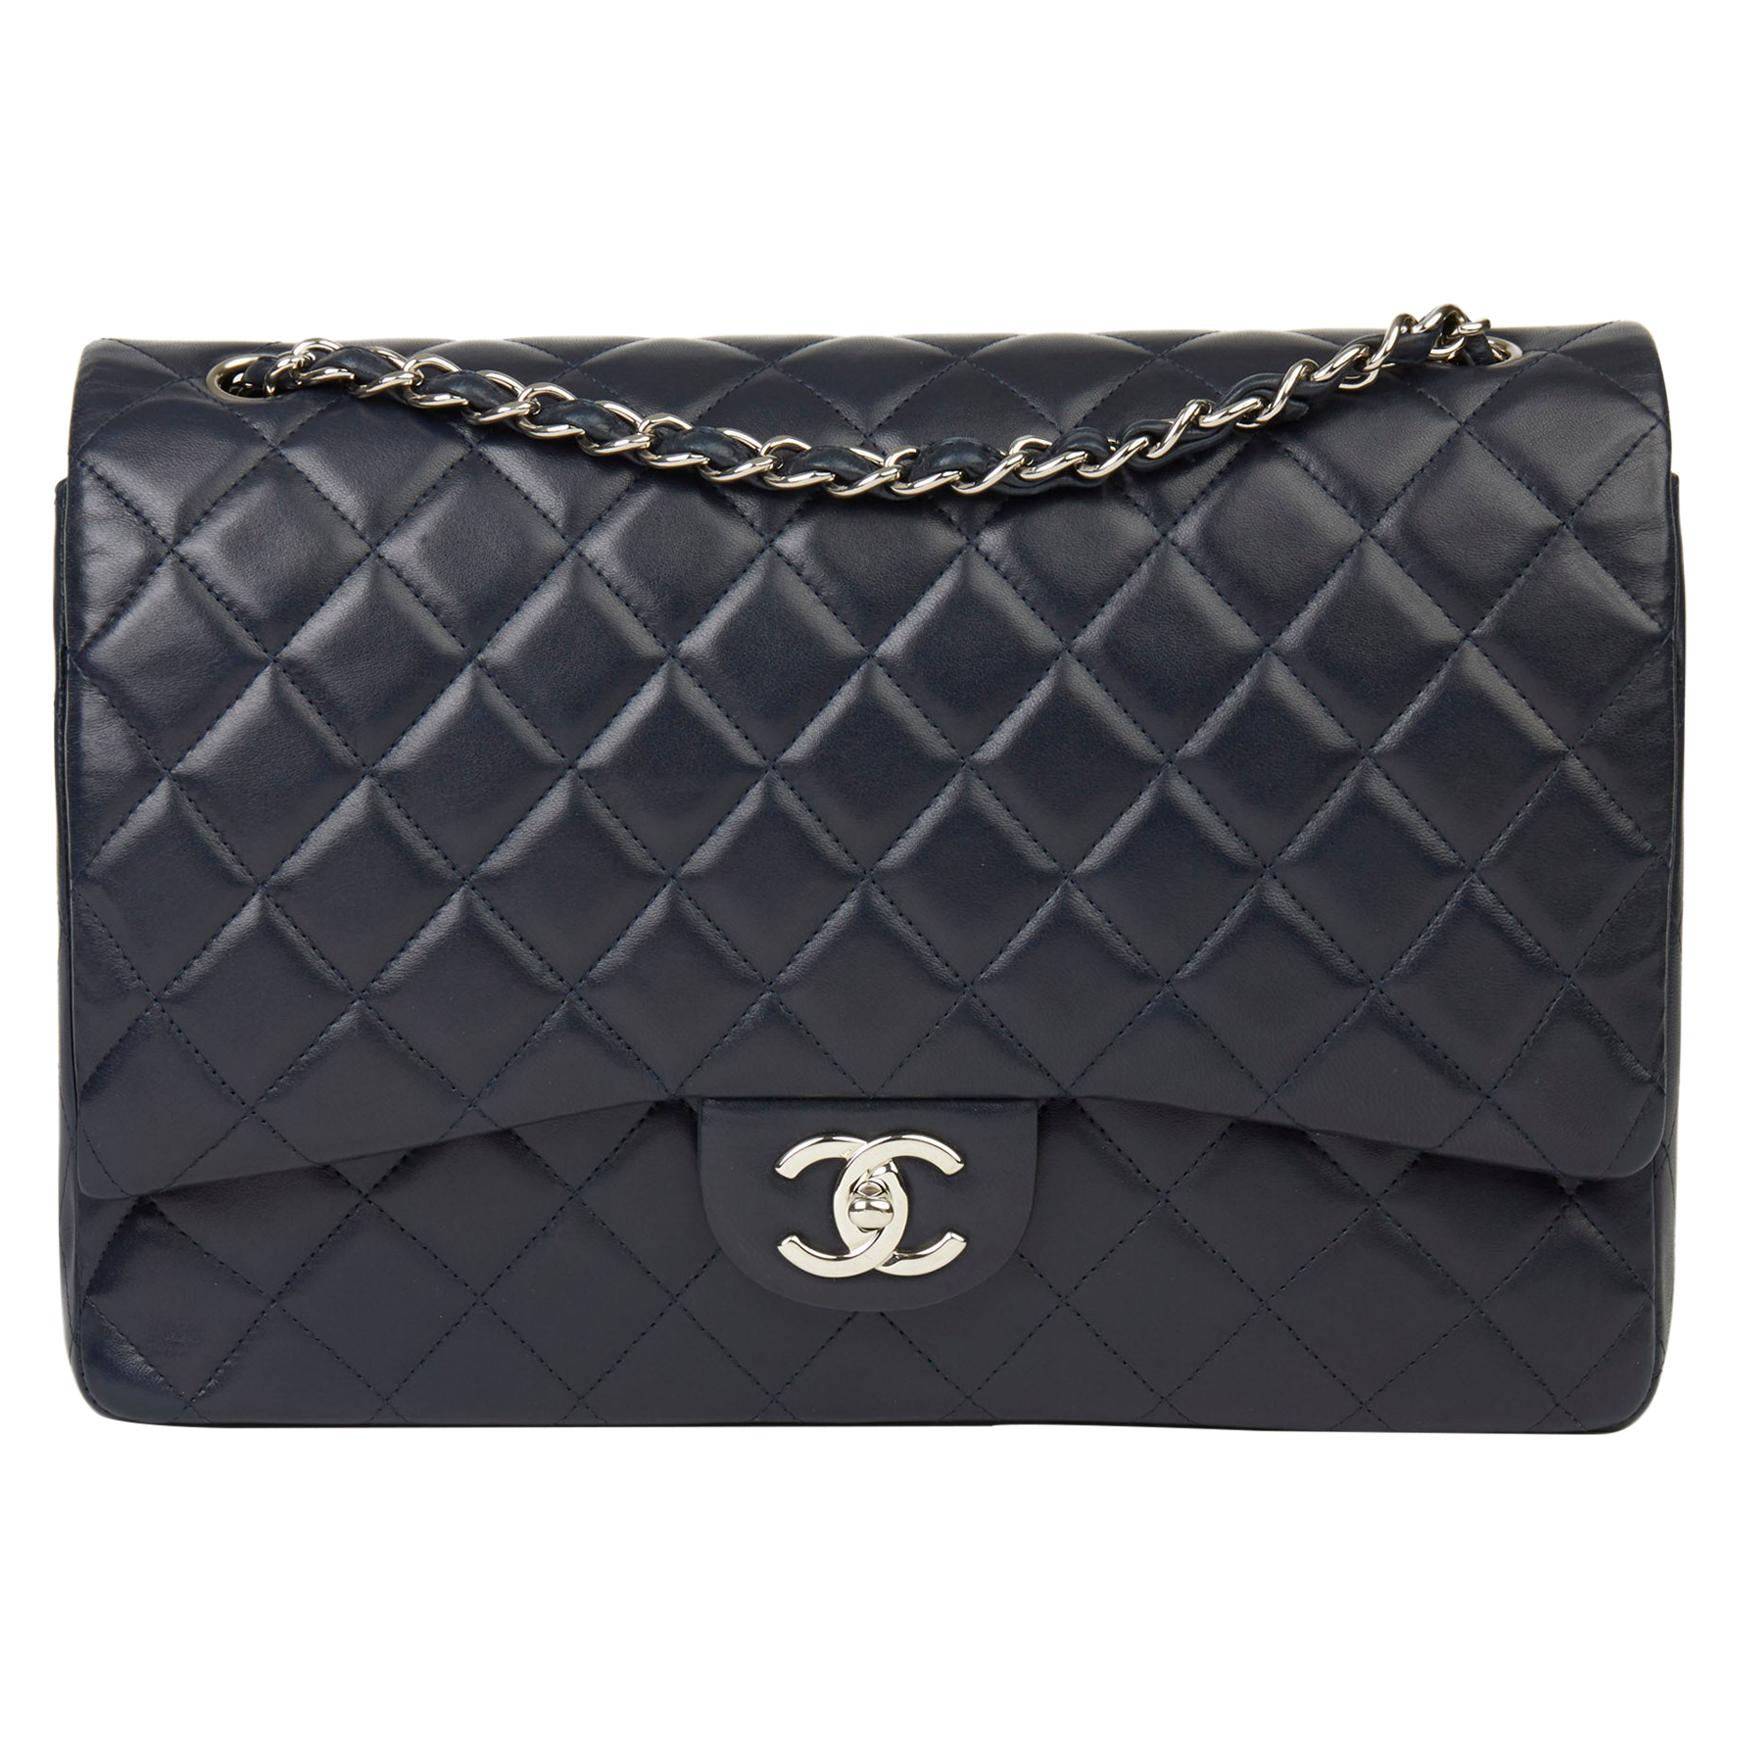 2011 Chanel Navy Quilted Lambskin Maxi Classic Double Flap Bag